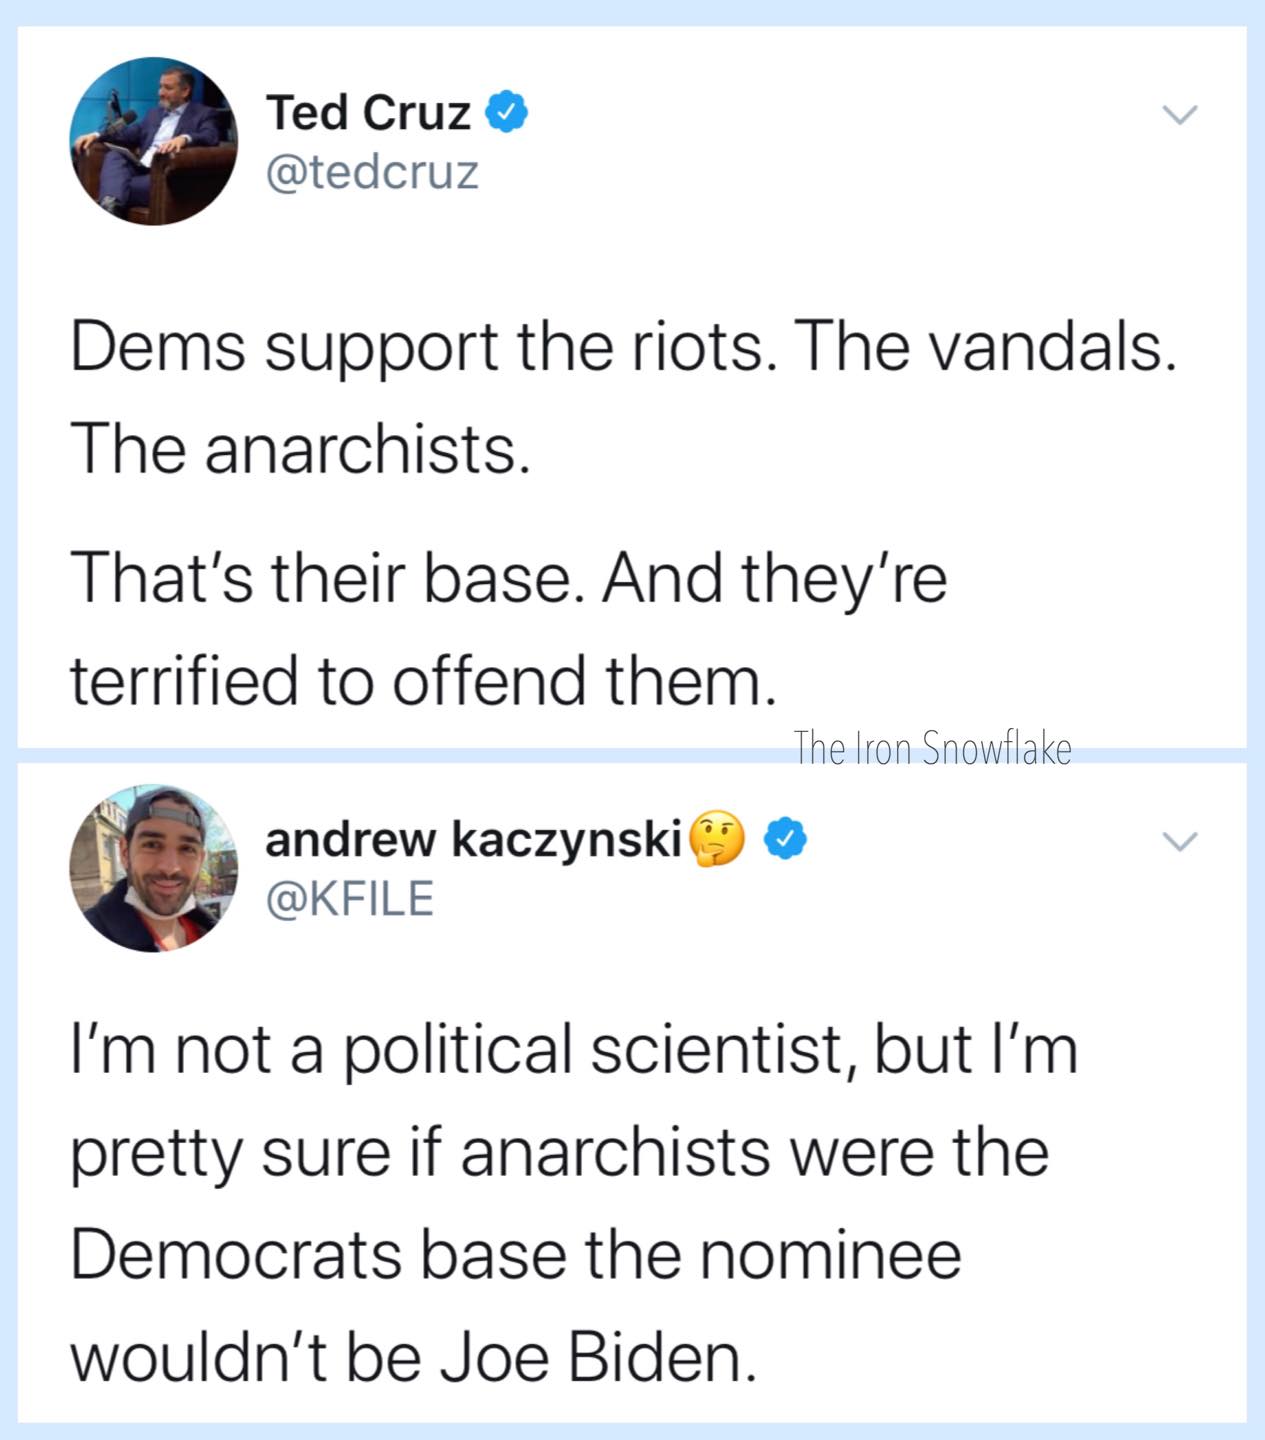 Political, Cruz, Trump, Republicans, Vandals, Donald Trump Political Memes Political, Cruz, Trump, Republicans, Vandals, Donald Trump text: Ted Cruz @tedcruz Dems support the riots. The vandals. The anarchists. That's their base. And they're terrified to offend them. The Iron Snowflake andrew kaczynski @KFILE I'm not a political scientist, but I'm pretty sure if anarchists were the Democrats base the nominee wouldn't be Joe Biden. 